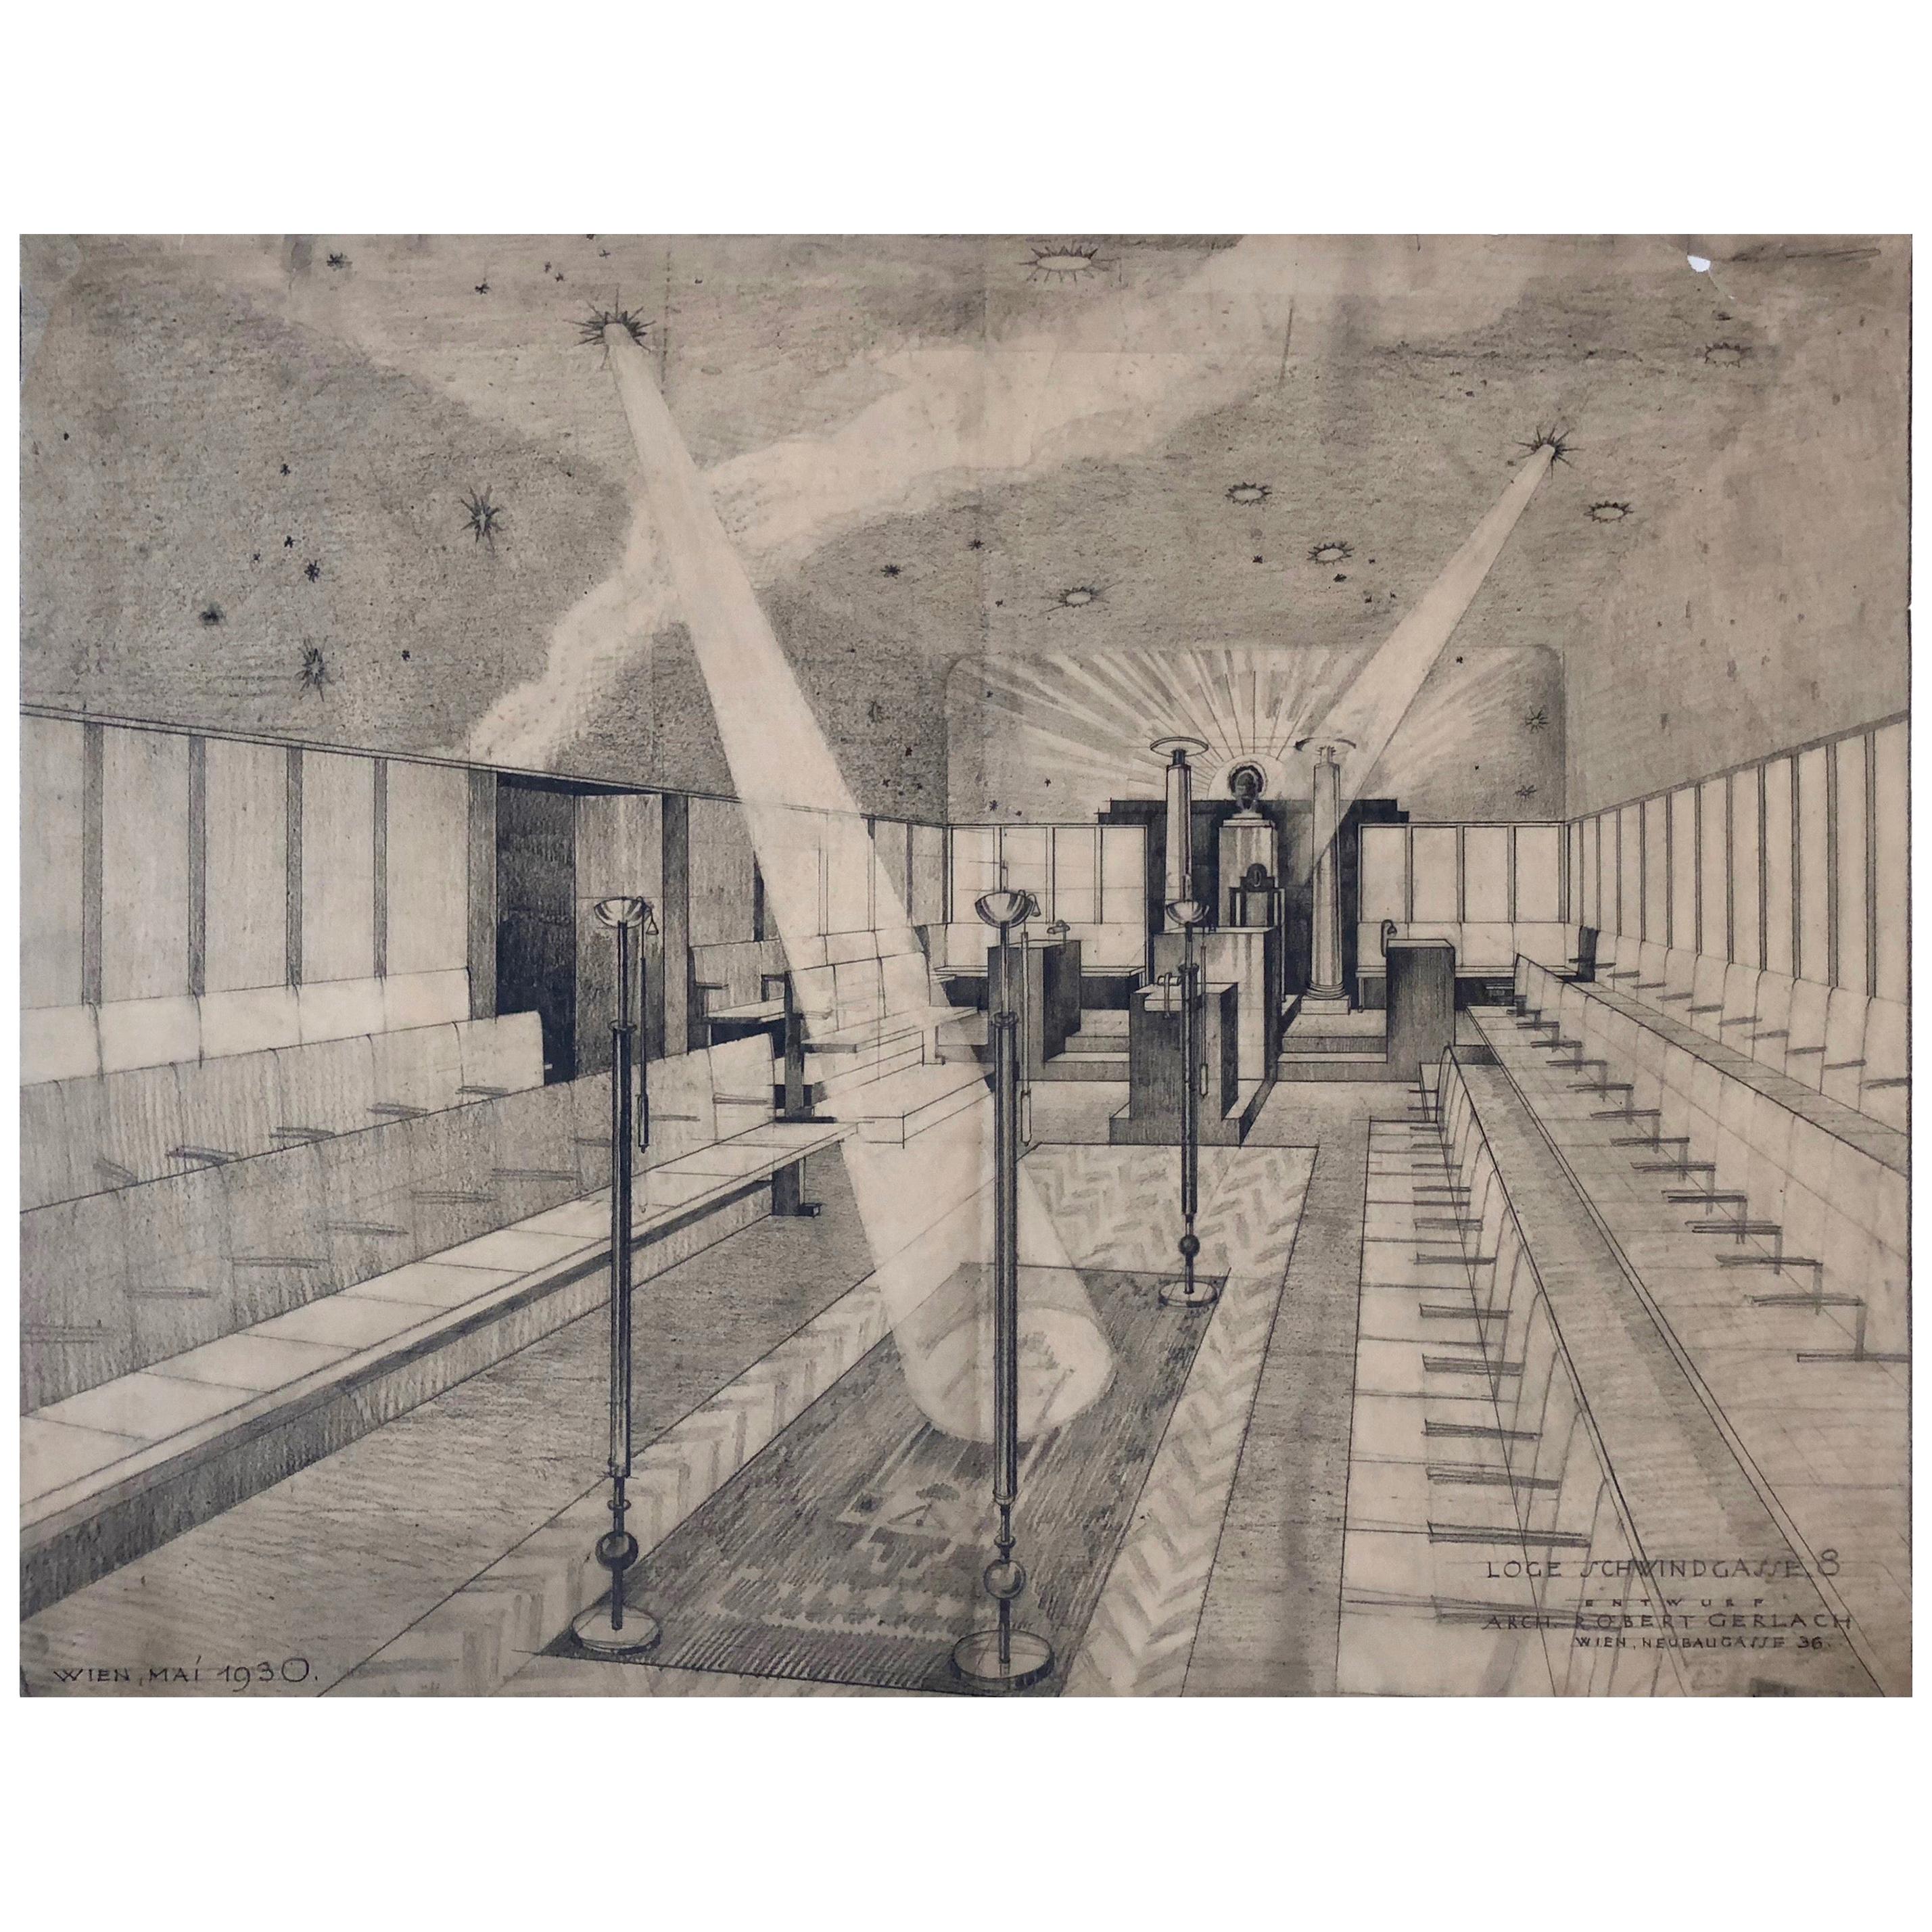 Set of Working Drawings, 1930, for a Free Masons Lodge, Schwind Gasse, Vienna